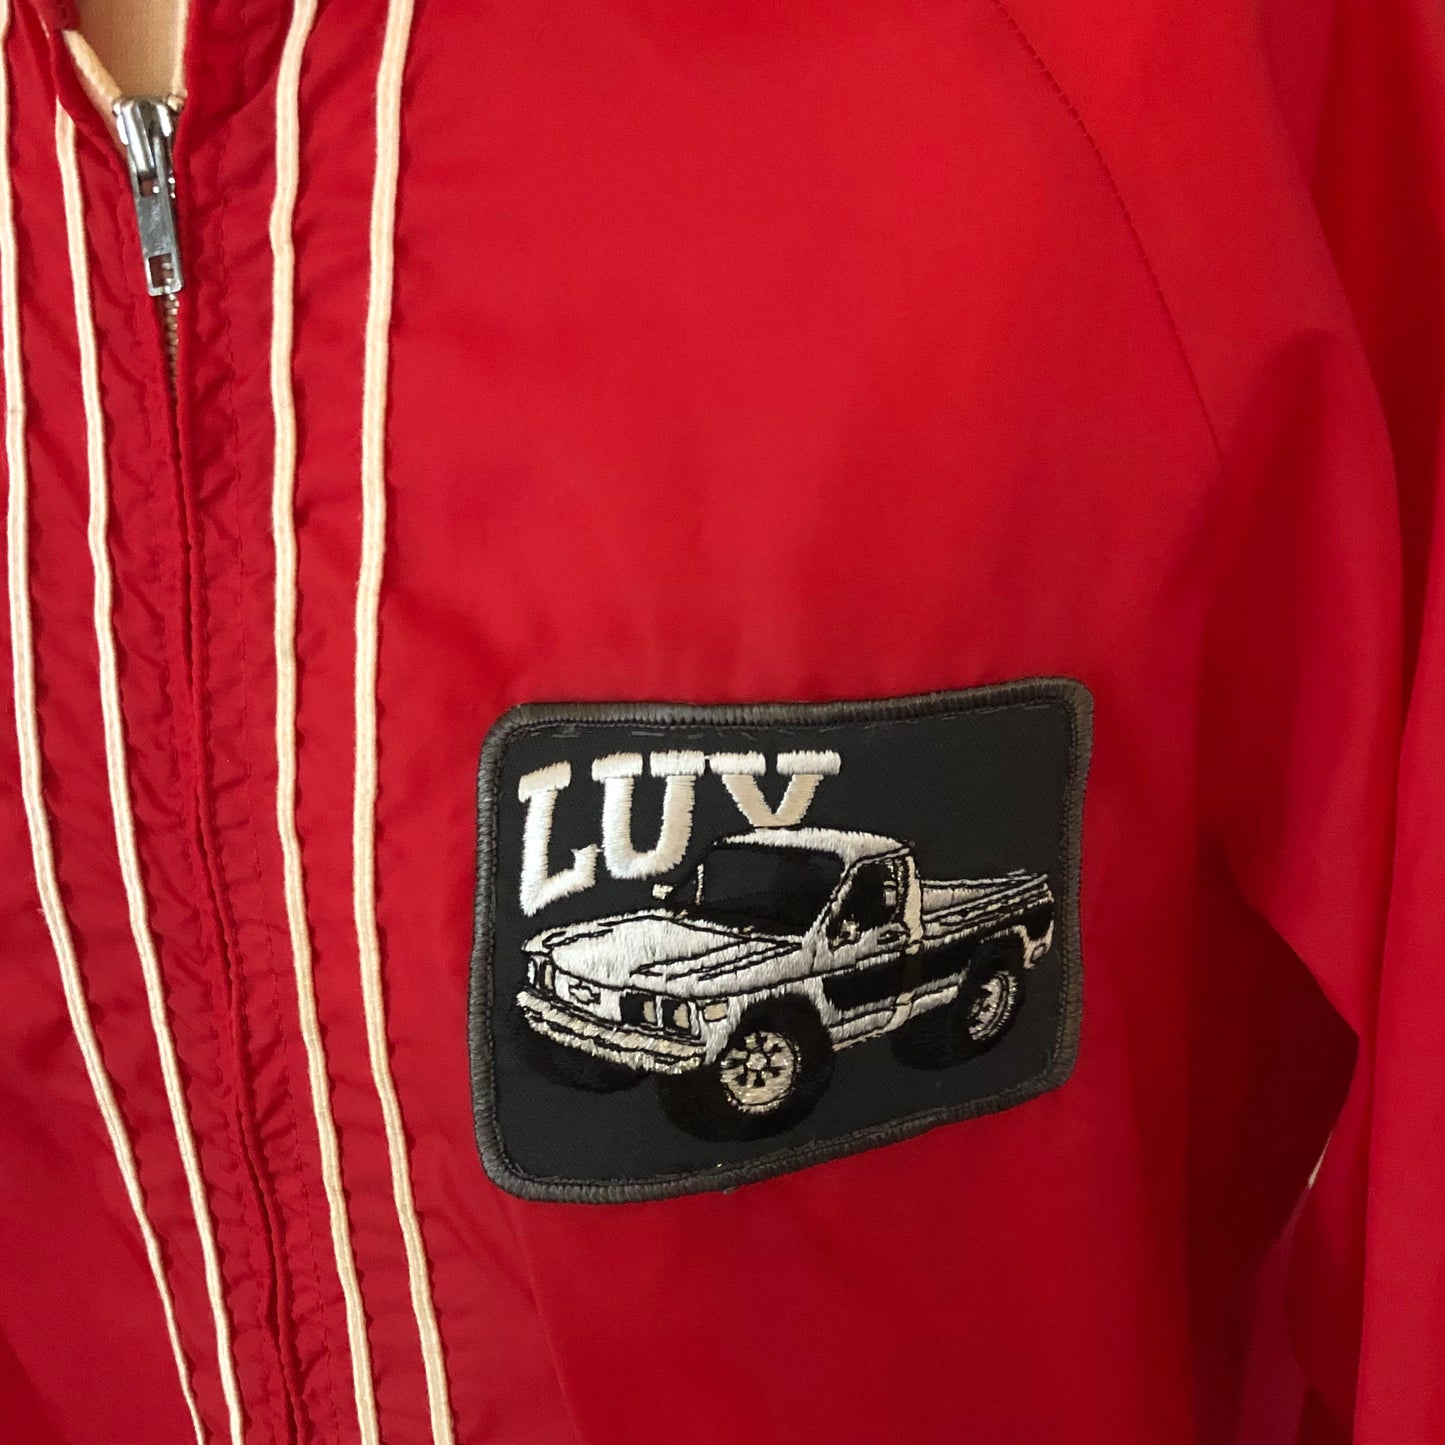 Vintage Nylon Windbreaker Jacket with Racing Stripes with LUV Truck Patch